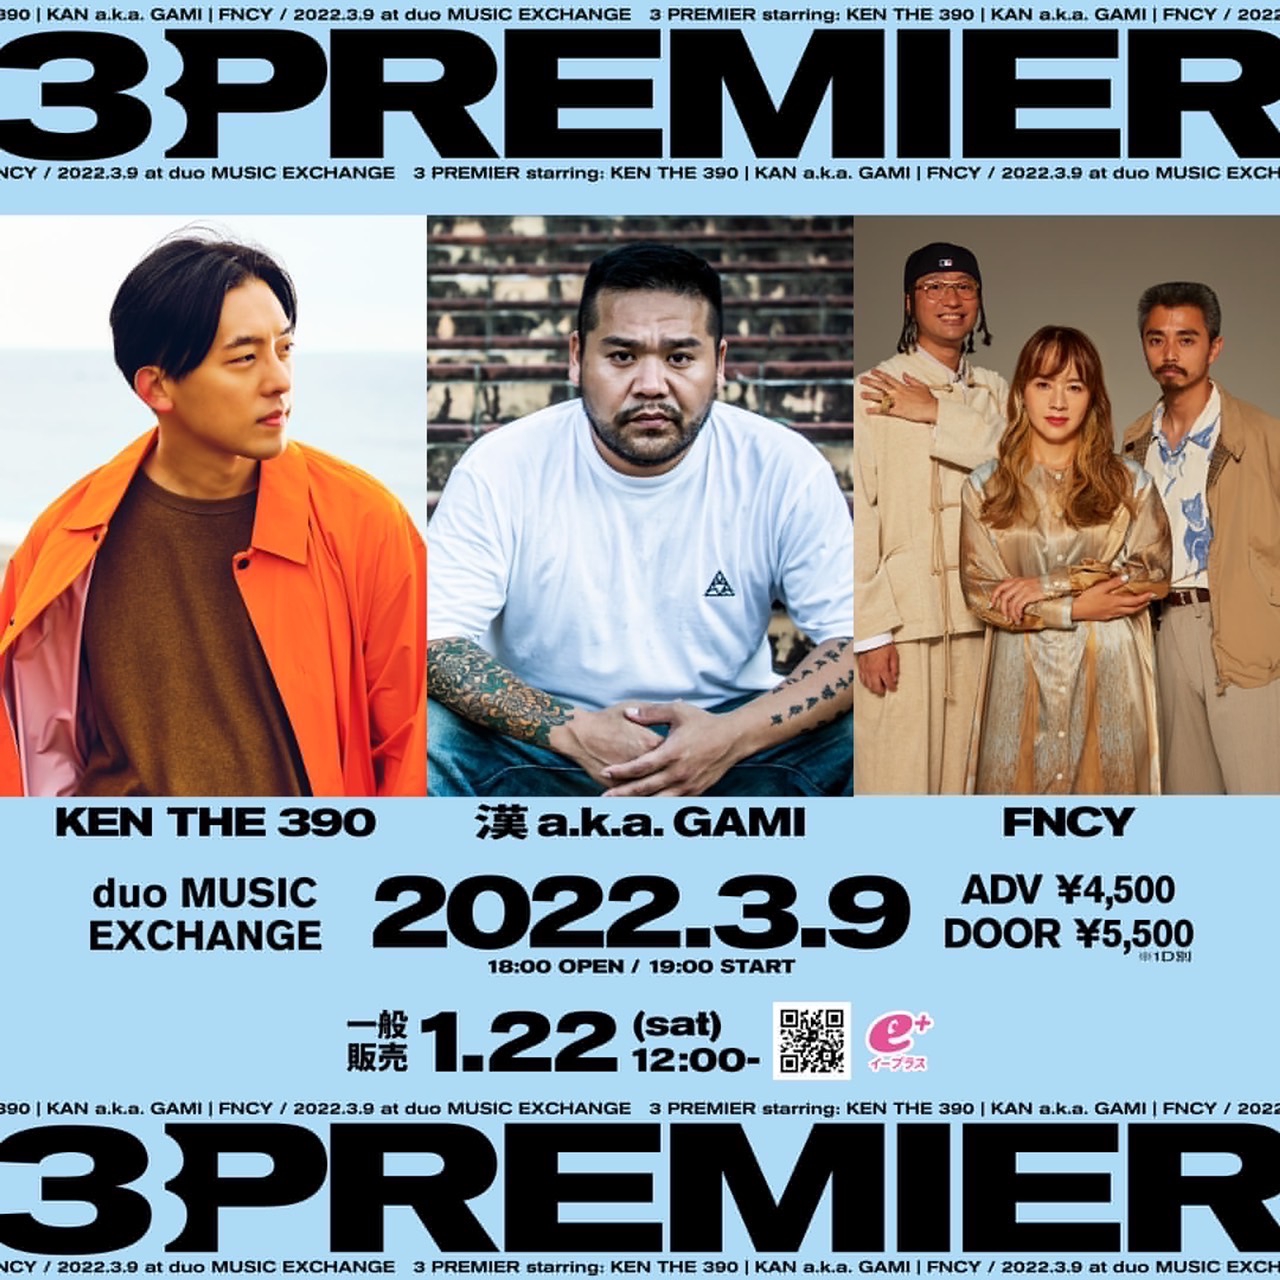 LIVE] 2022年3月9日(水) 「3PREMIER」 KEN THE 390 / 漢 a.k.a. GAMI 